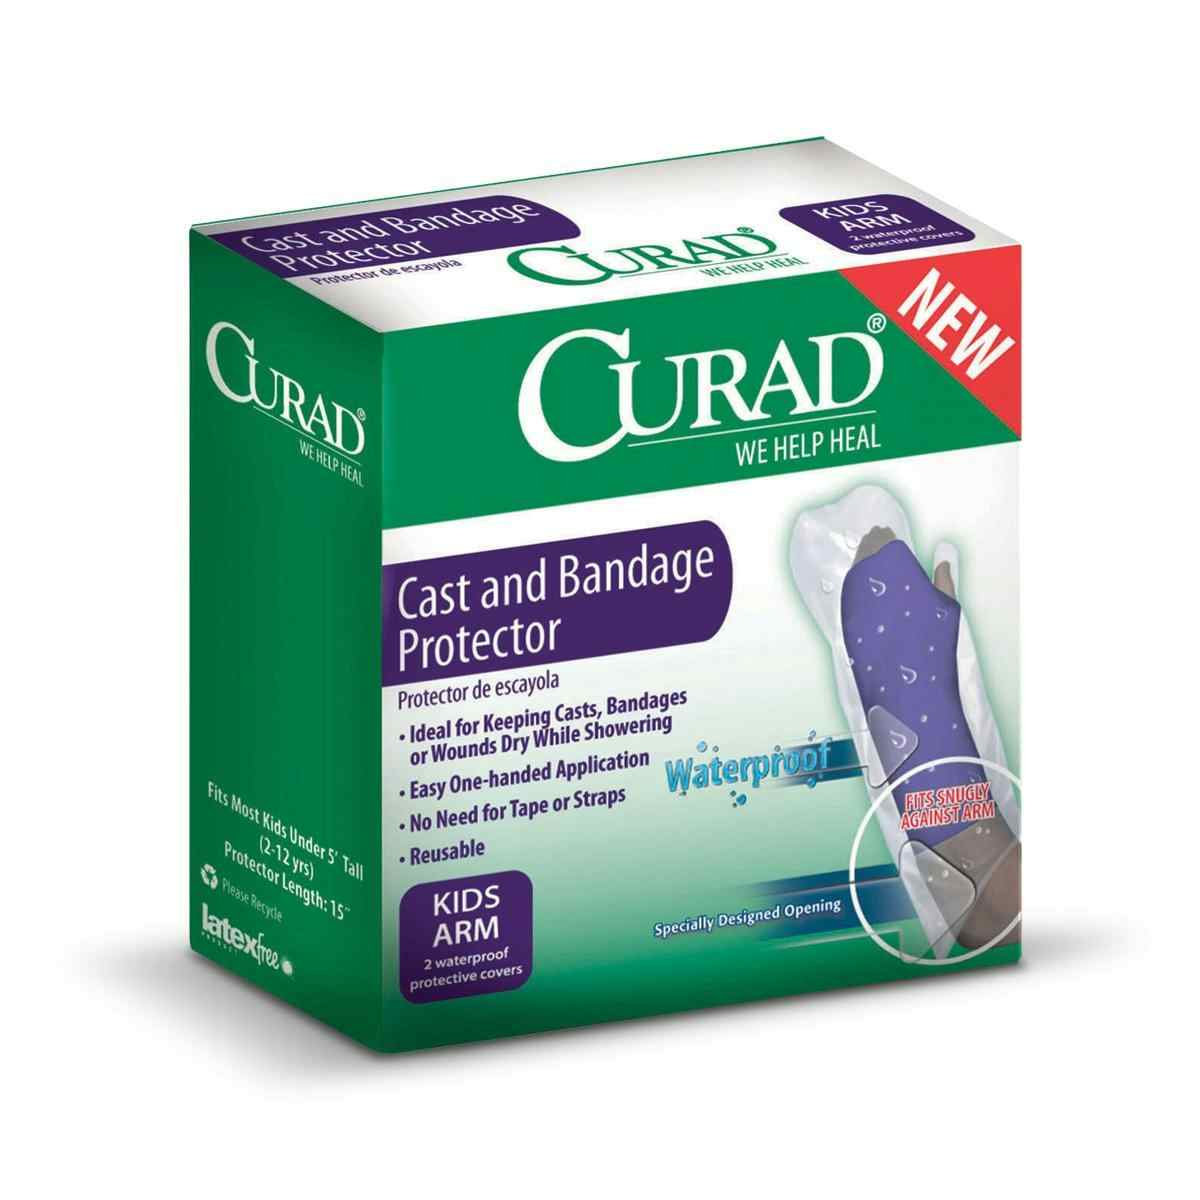 Curad Cast and Bandage Protector for Arms , CUR100KAAH, Child Arm Size - 1 Box 